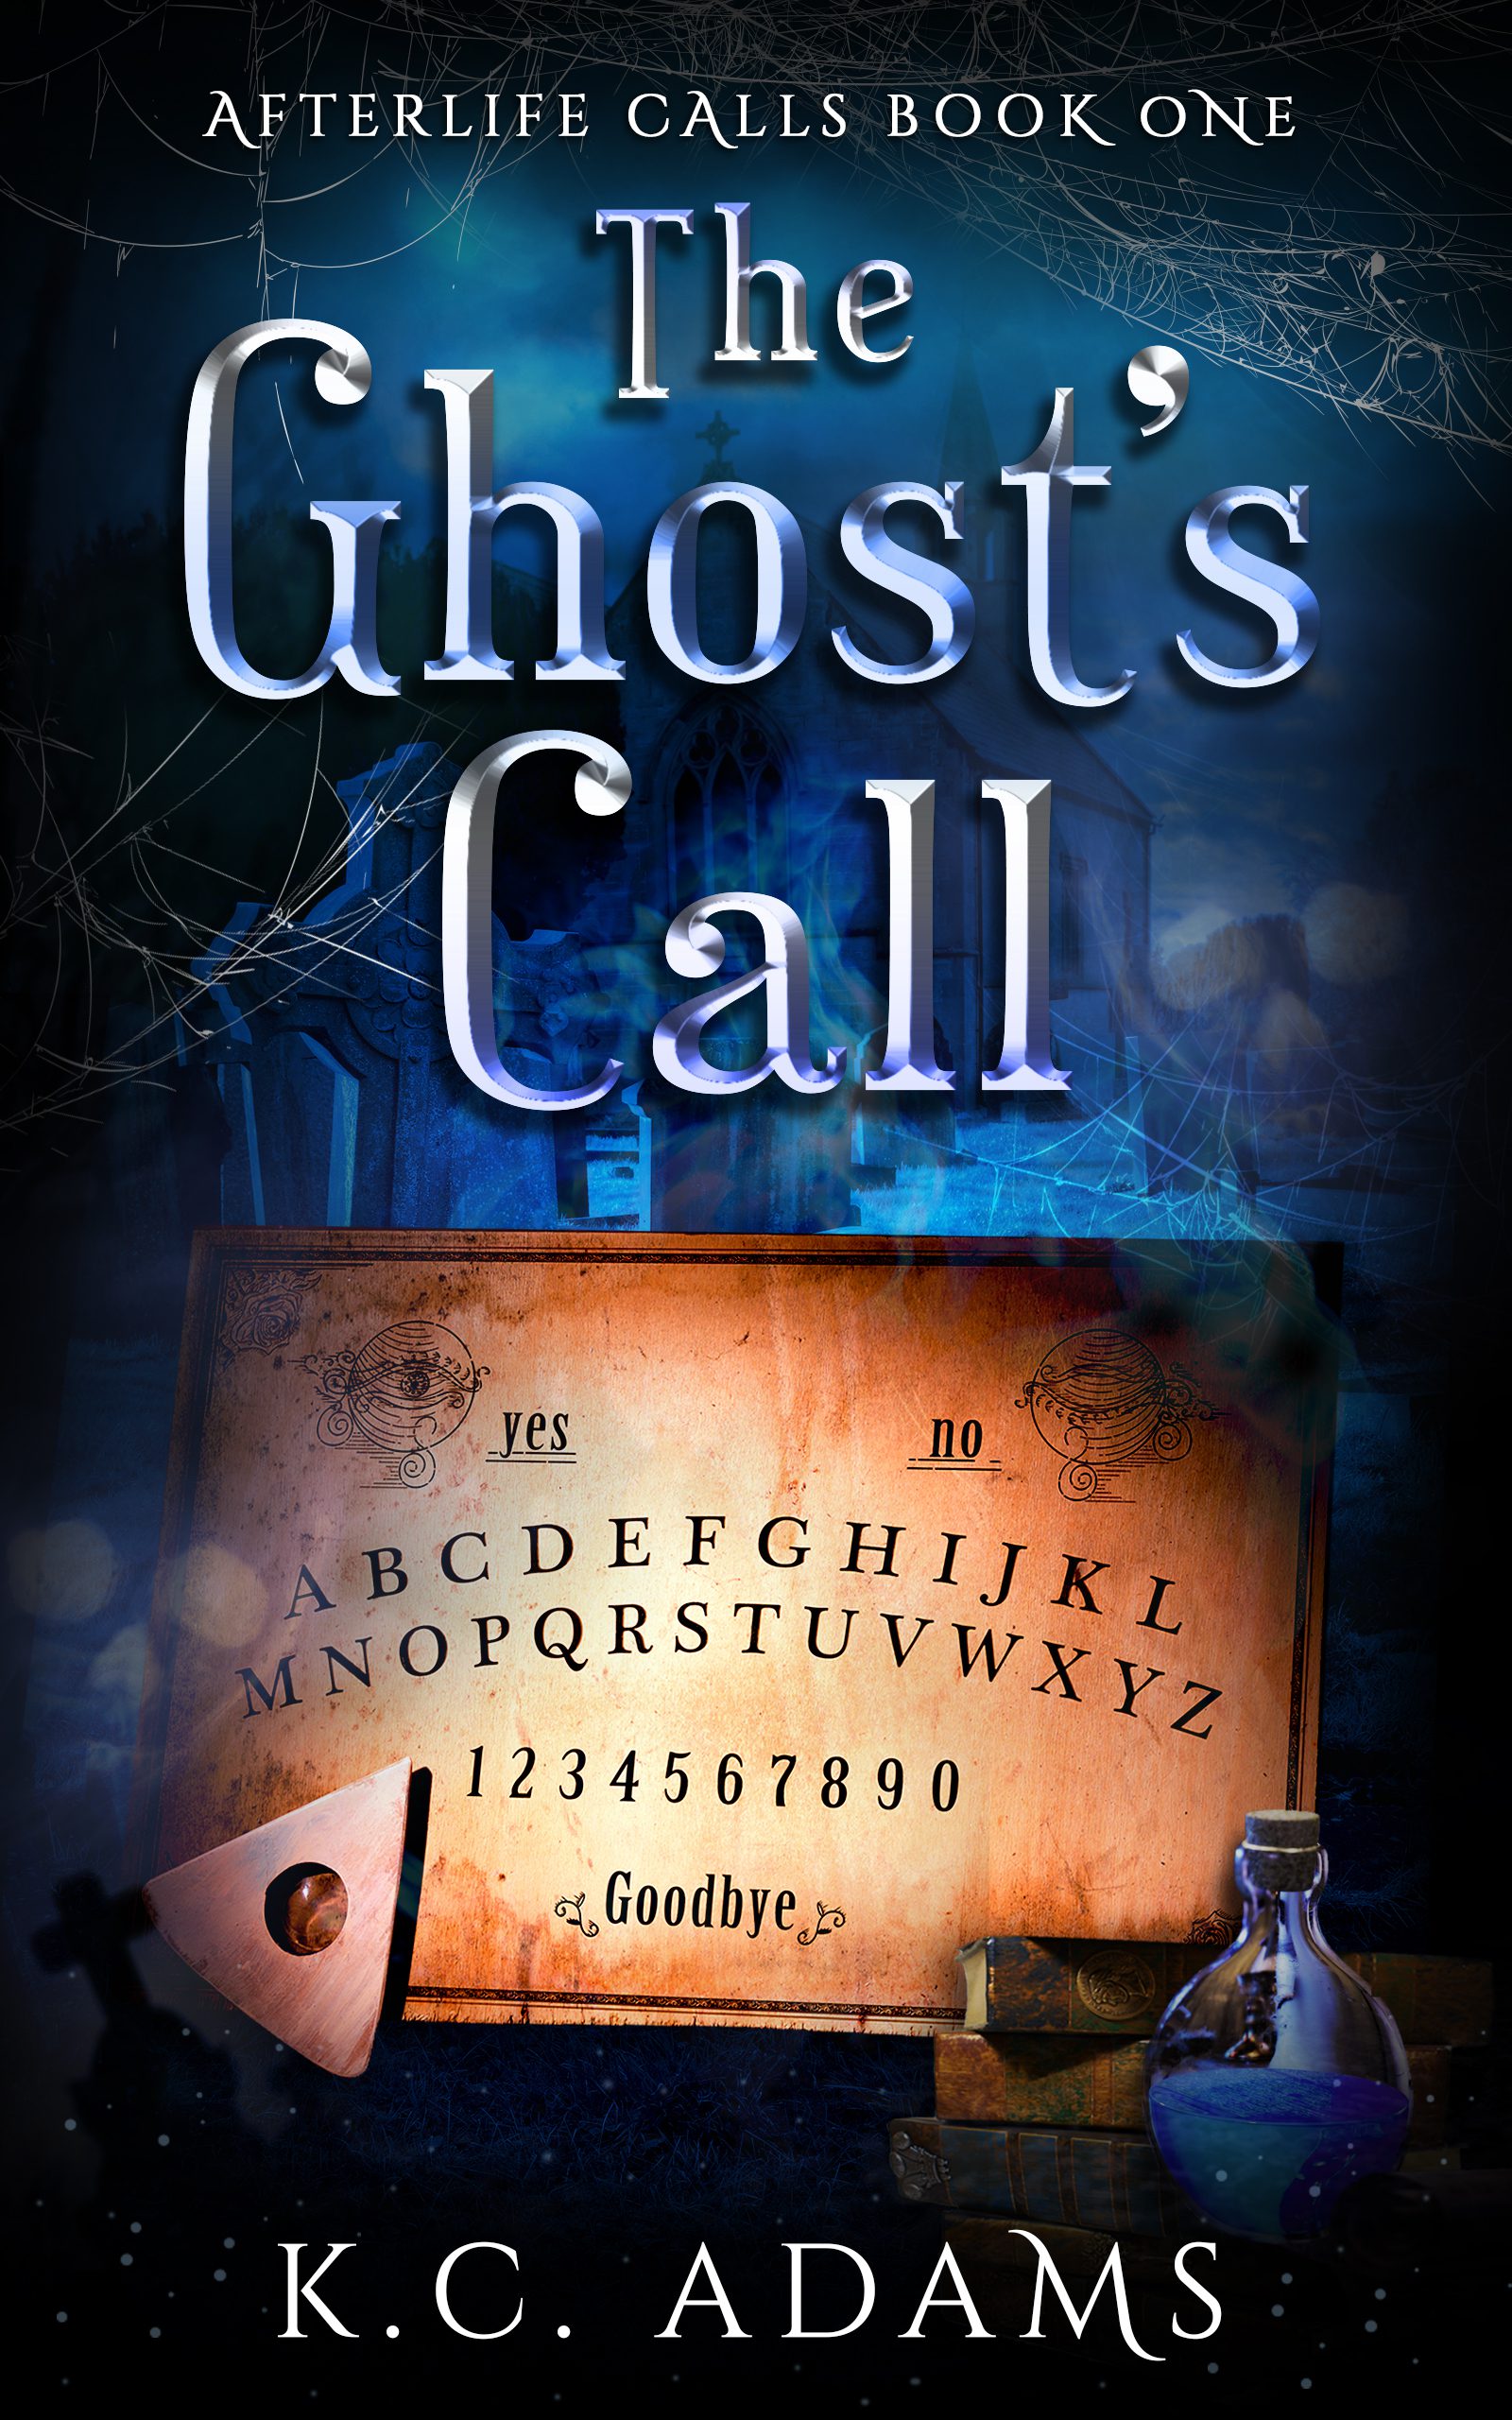 The Ghost's Call - Afterlife Calls Book 1 by K.C.Adams